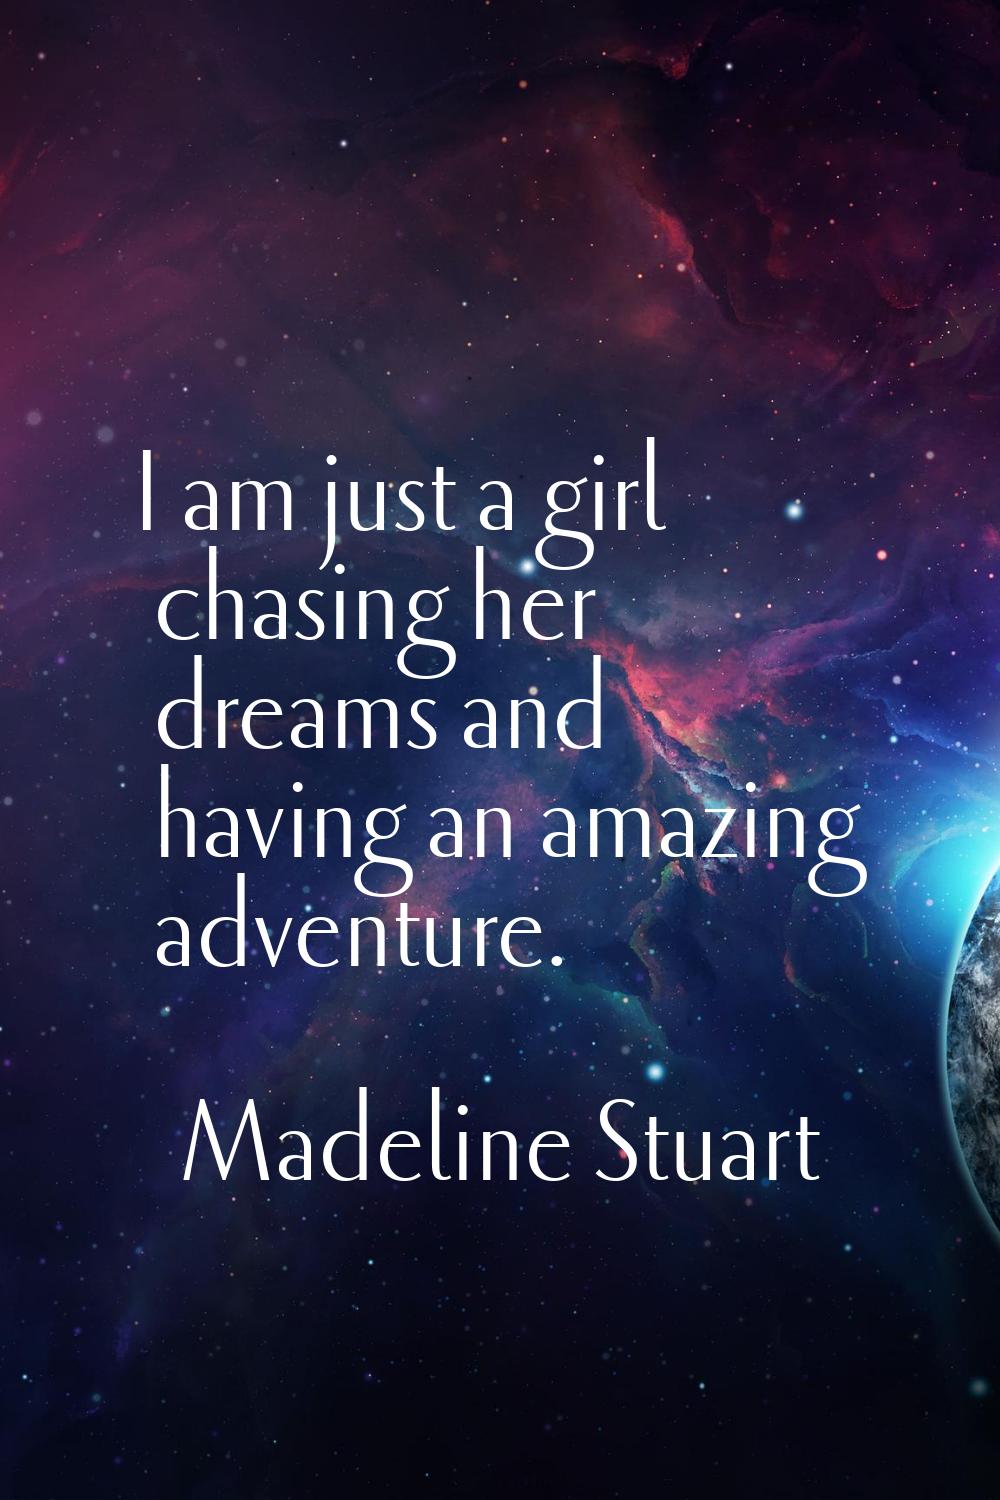 I am just a girl chasing her dreams and having an amazing adventure.